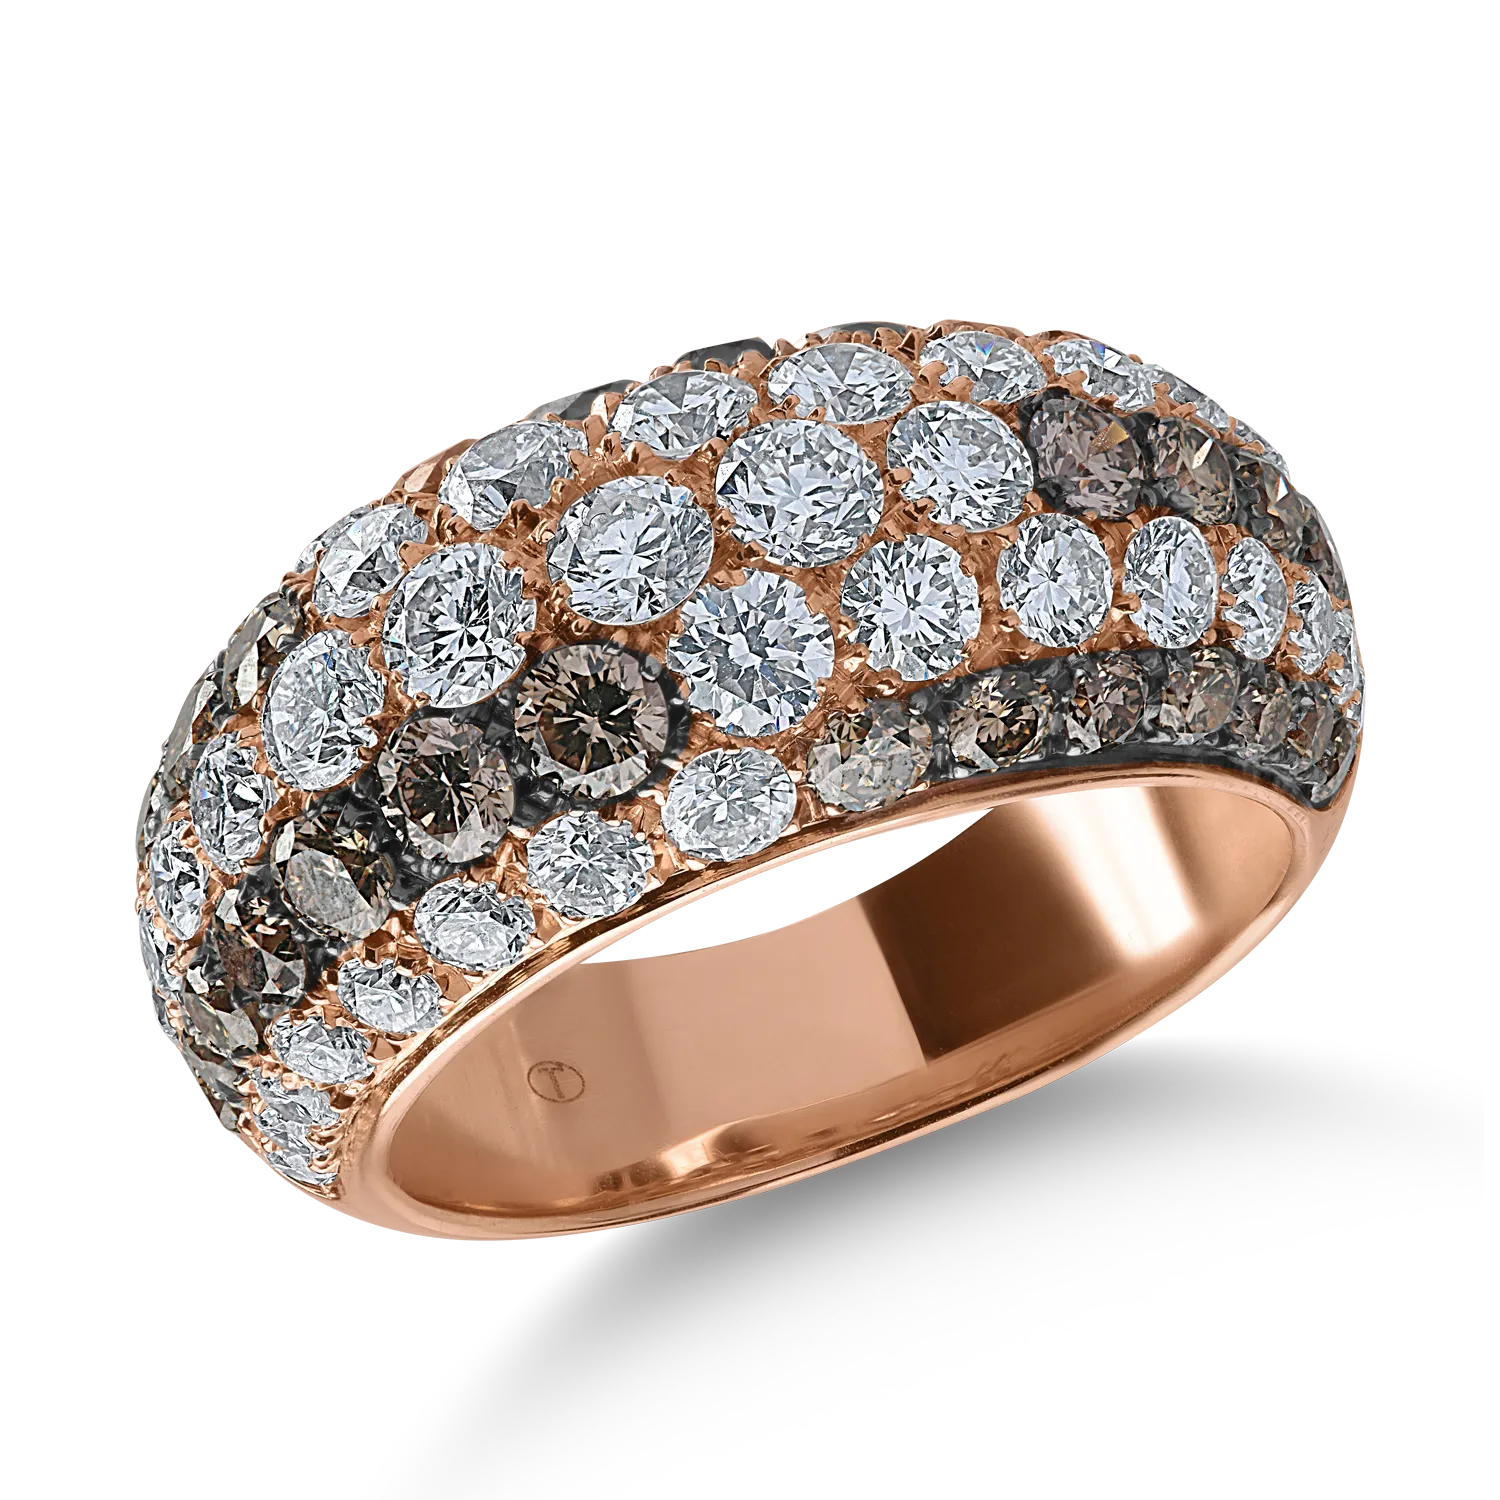 Rose gold ring with 2.06ct clear diamonds and 1.43ct brown diamonds